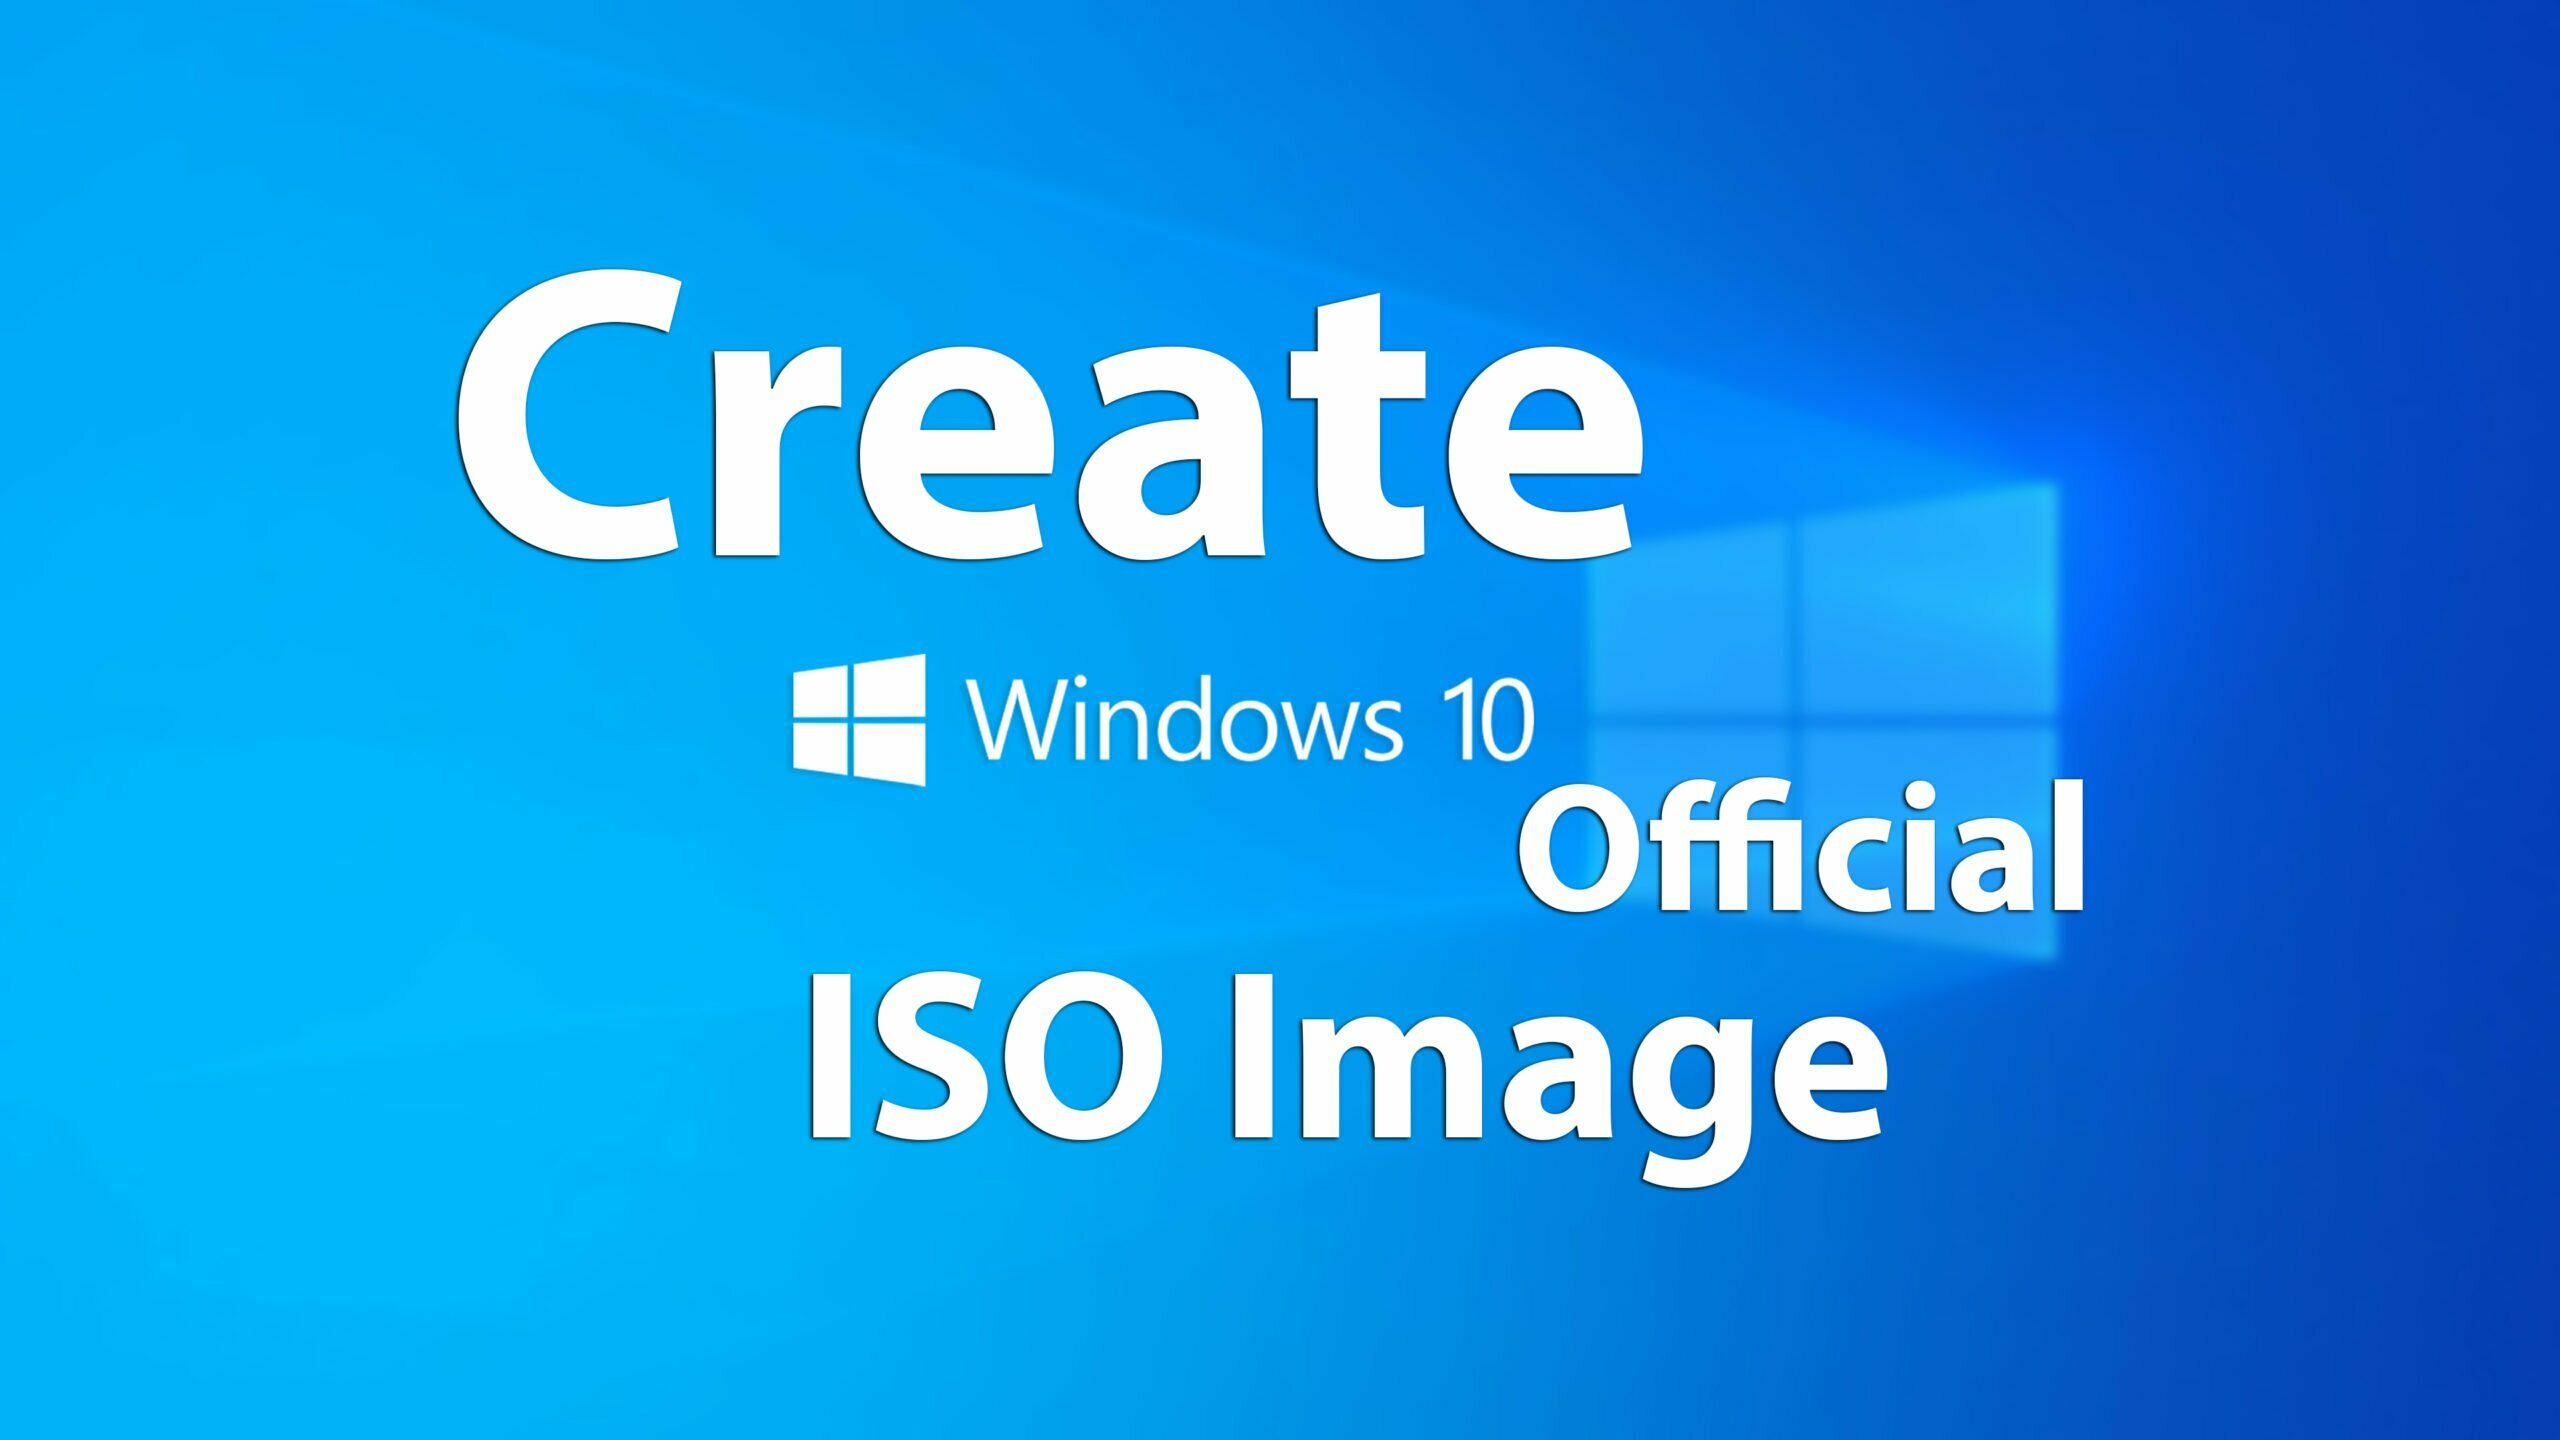 How to Create Windows 10 Official ISO Image File?